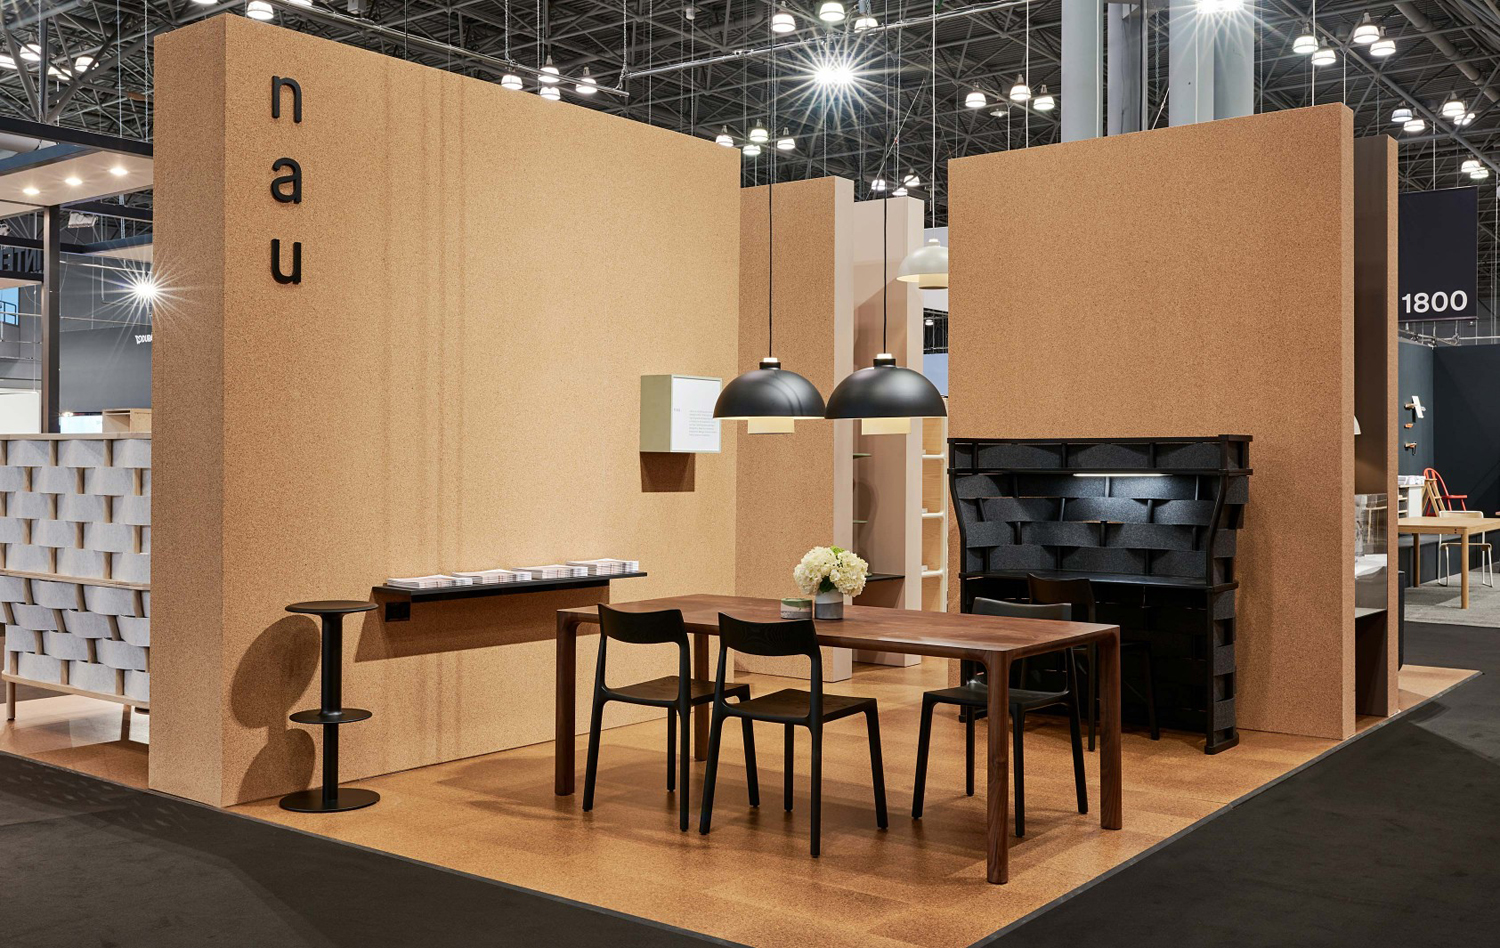 Brand identity and exhibition graphics by Design by Toko for Cult's new contemporary furniture range NAU